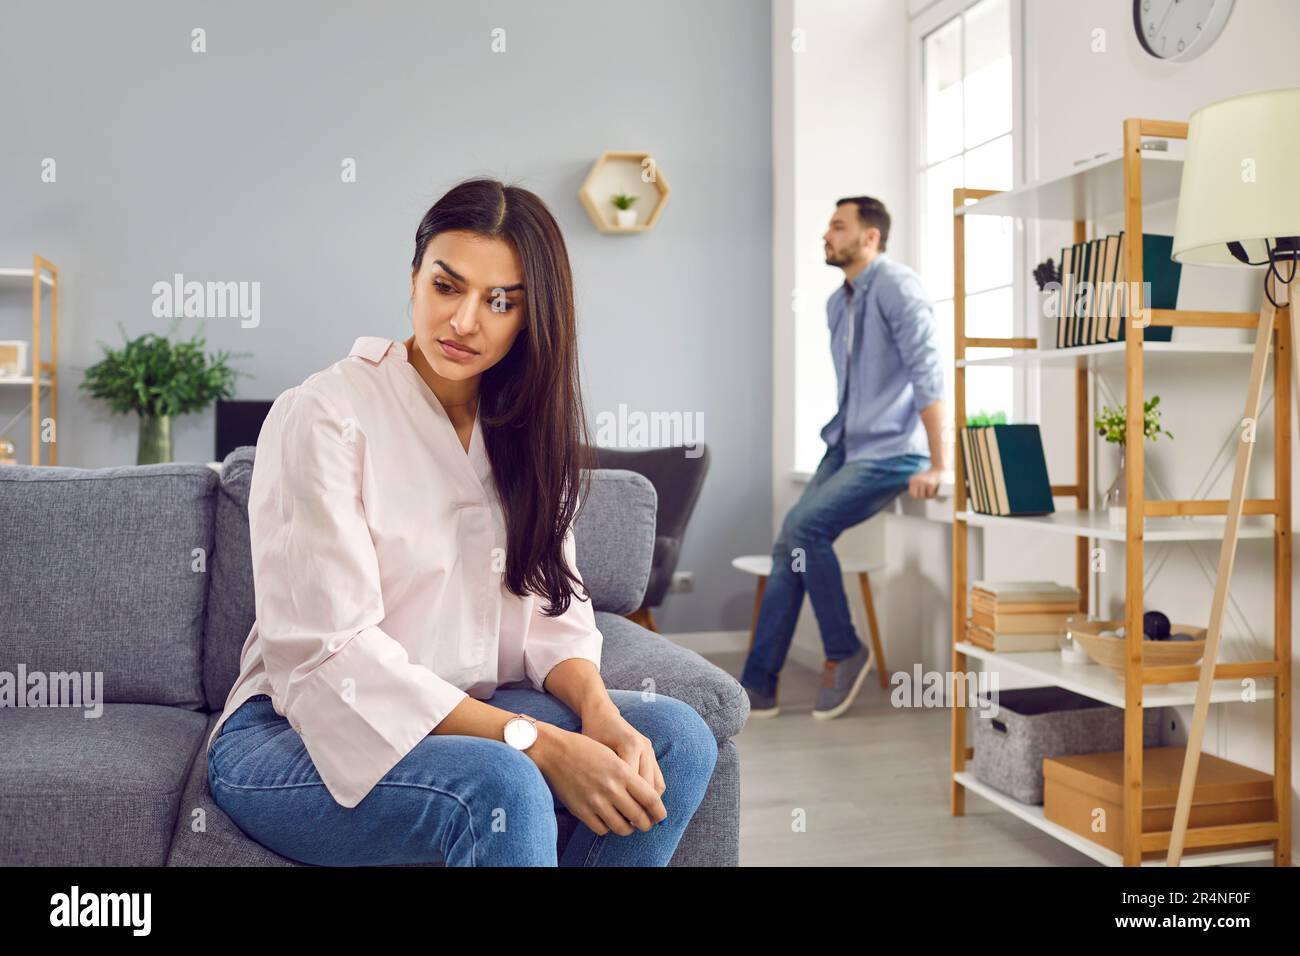 Upset young woman sitting on sofa and a man in background at home. Quarrel and divorce concept. Stock Photo